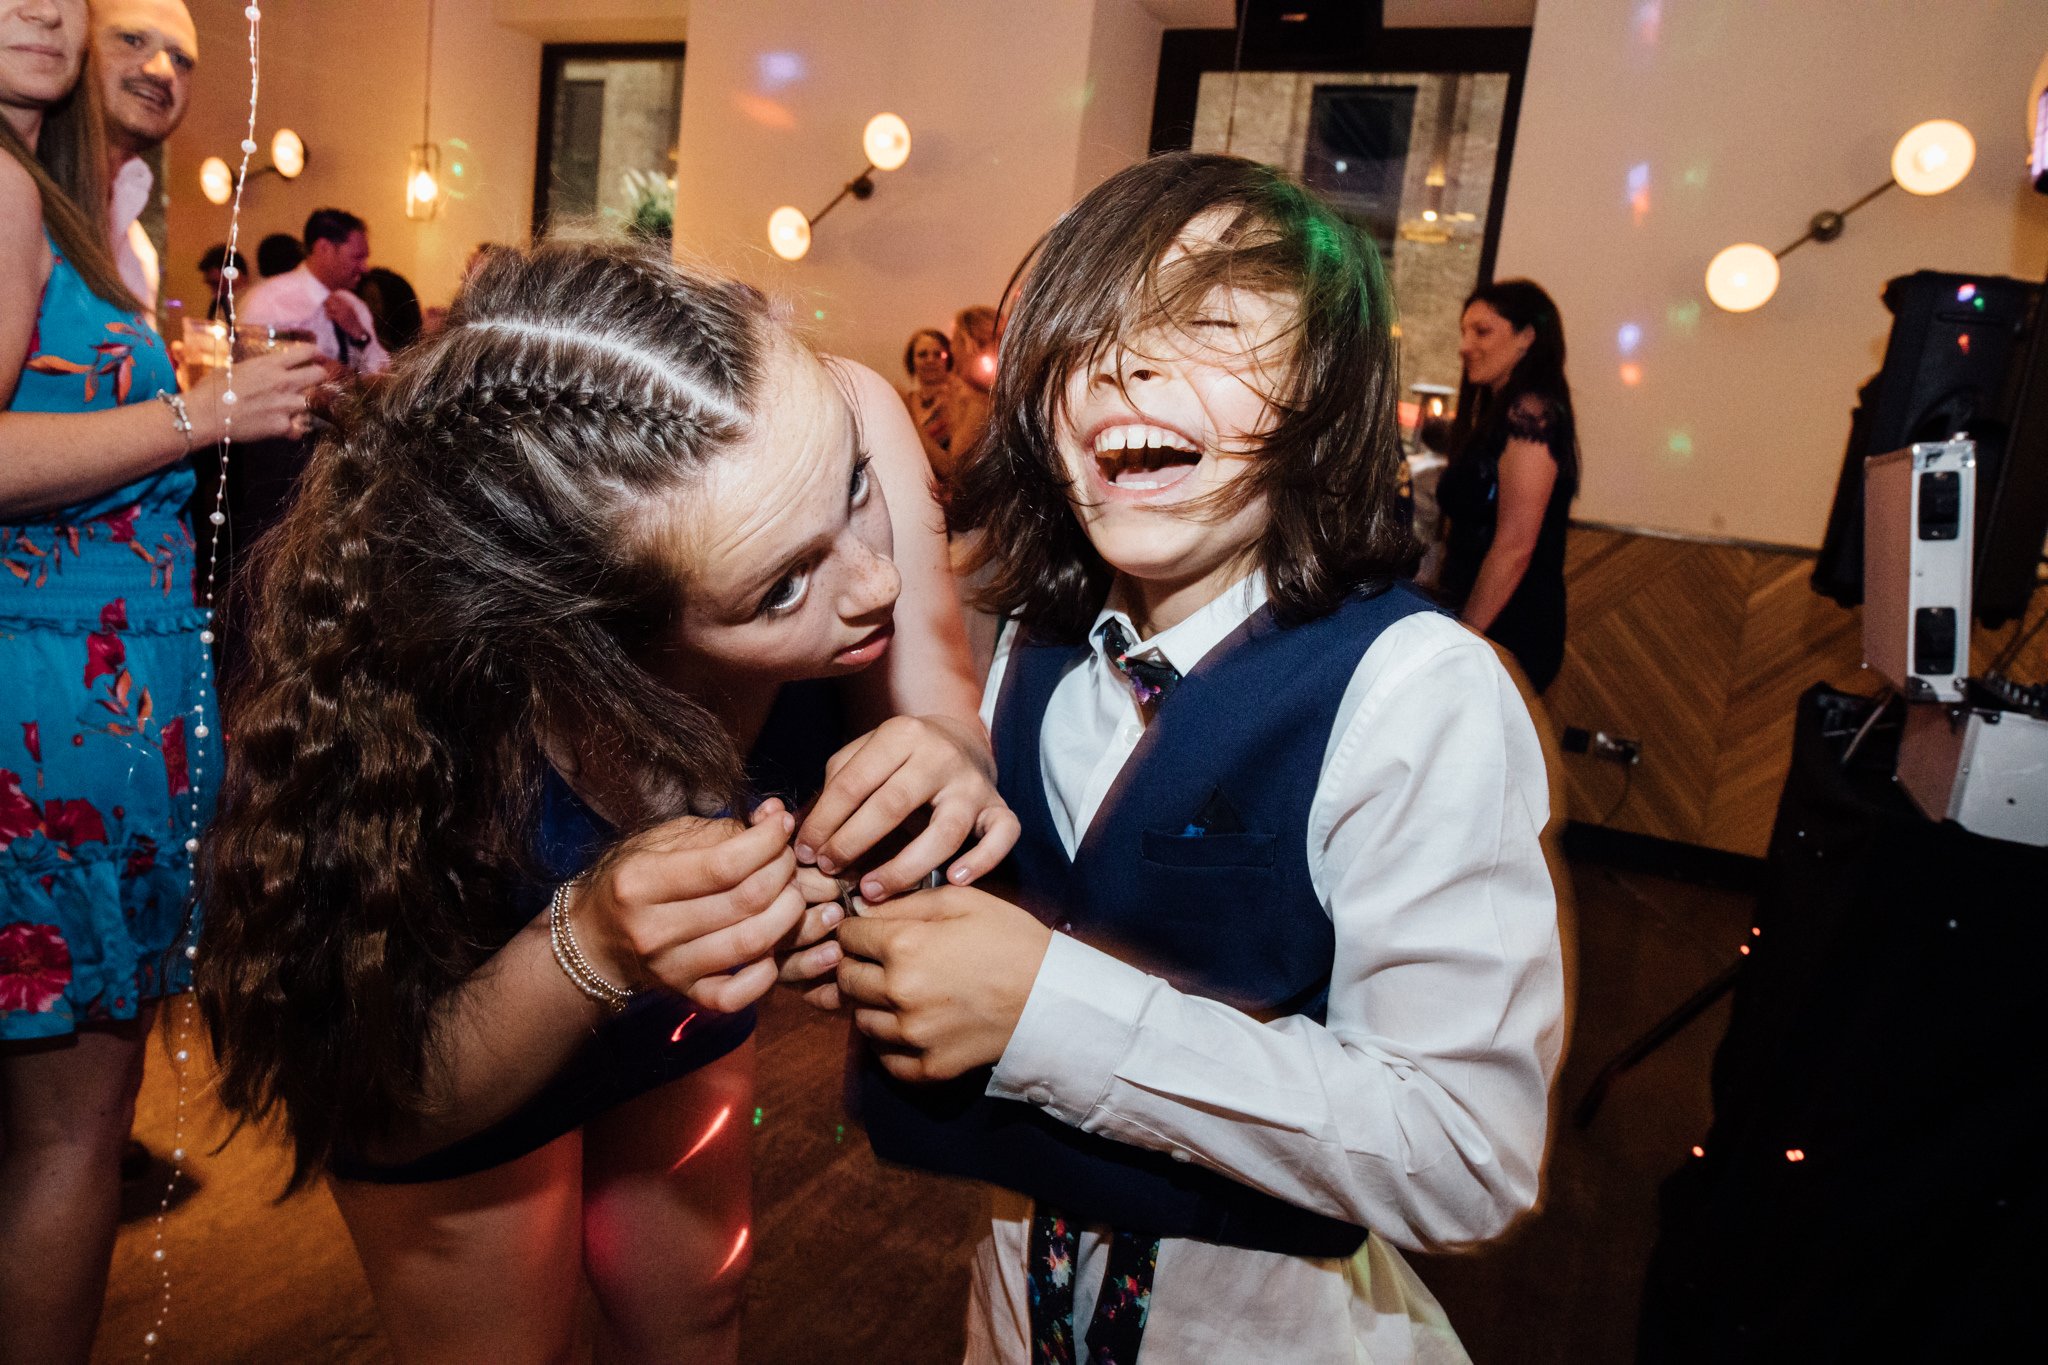  Young wedding guests laughing 